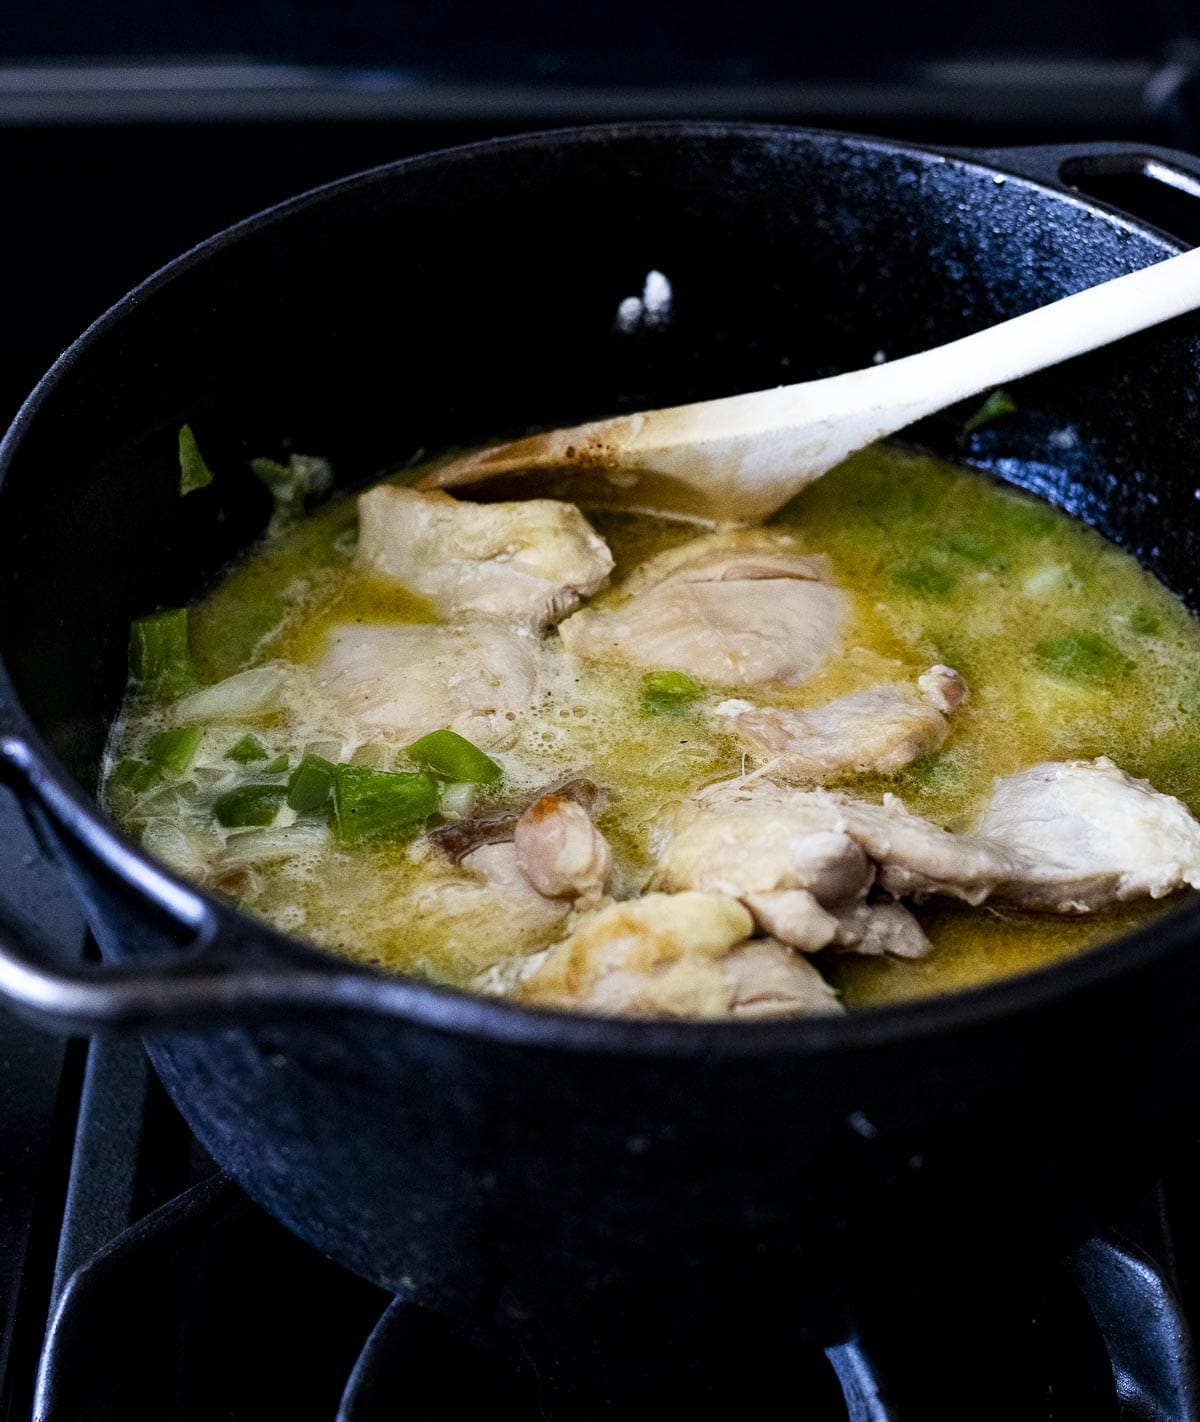 Chicken added into the pot with the broth.